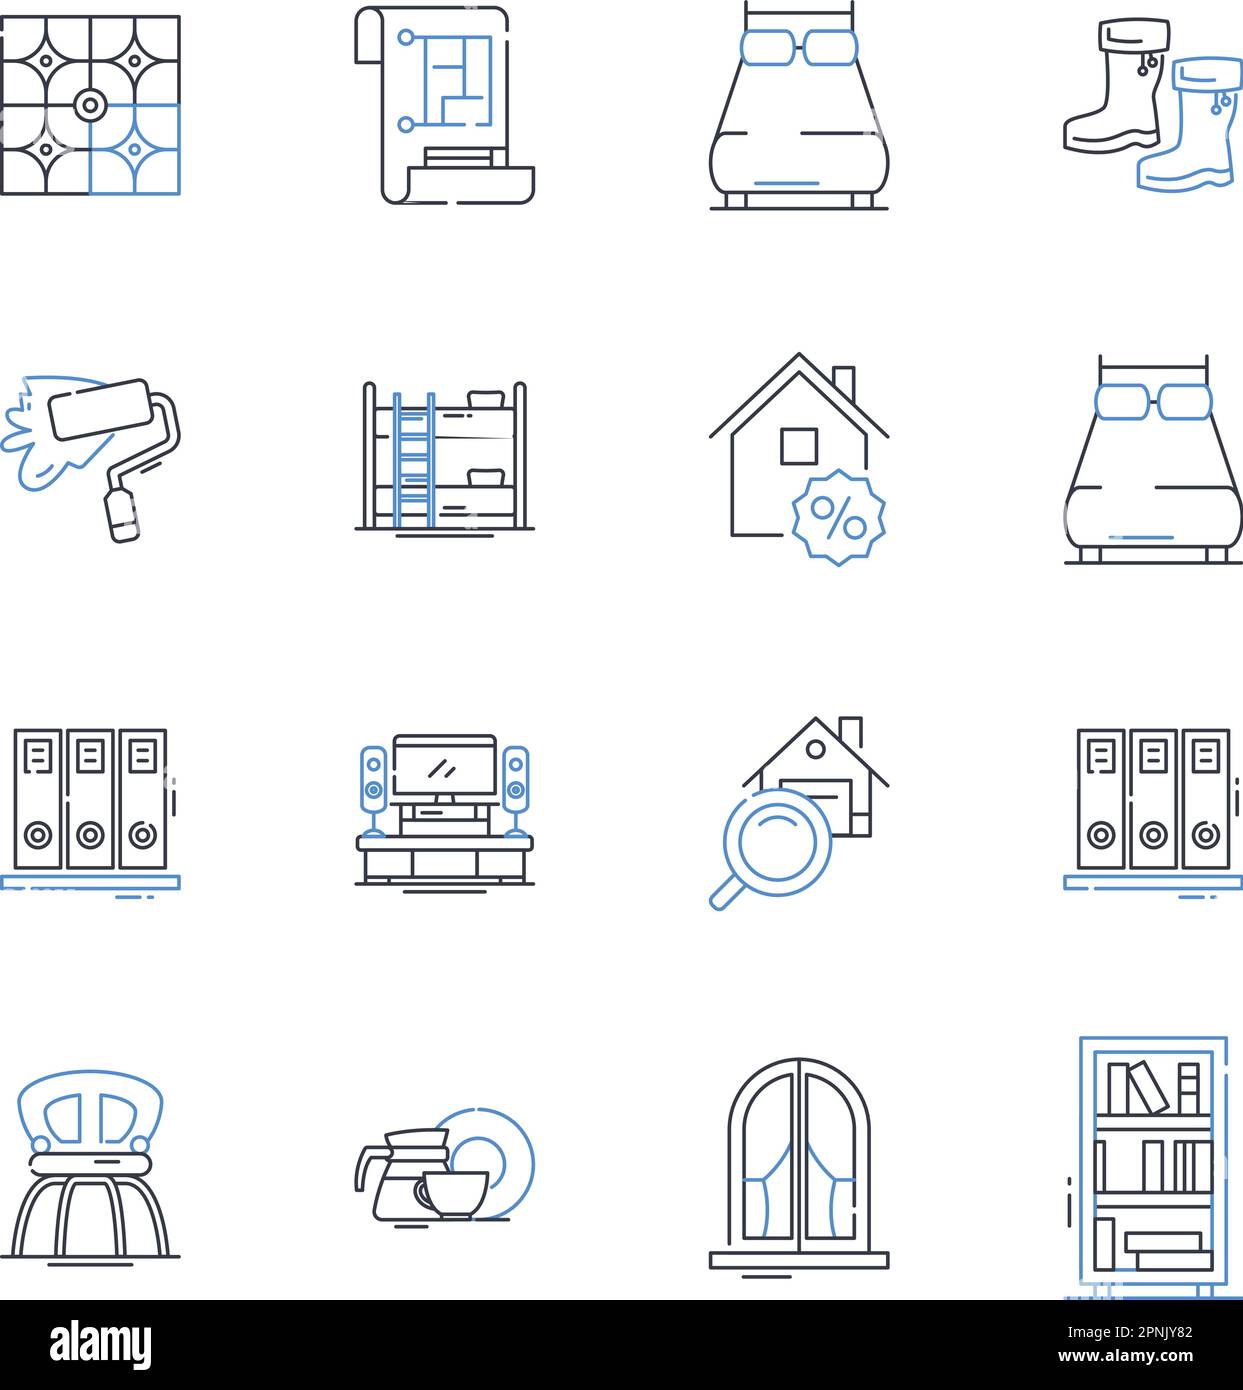 https://c8.alamy.com/comp/2PNJY82/suite-and-quarters-line-icons-collection-accommodations-lodgings-residence-housing-apartment-dwelling-flat-vector-and-linear-illustration-2PNJY82.jpg